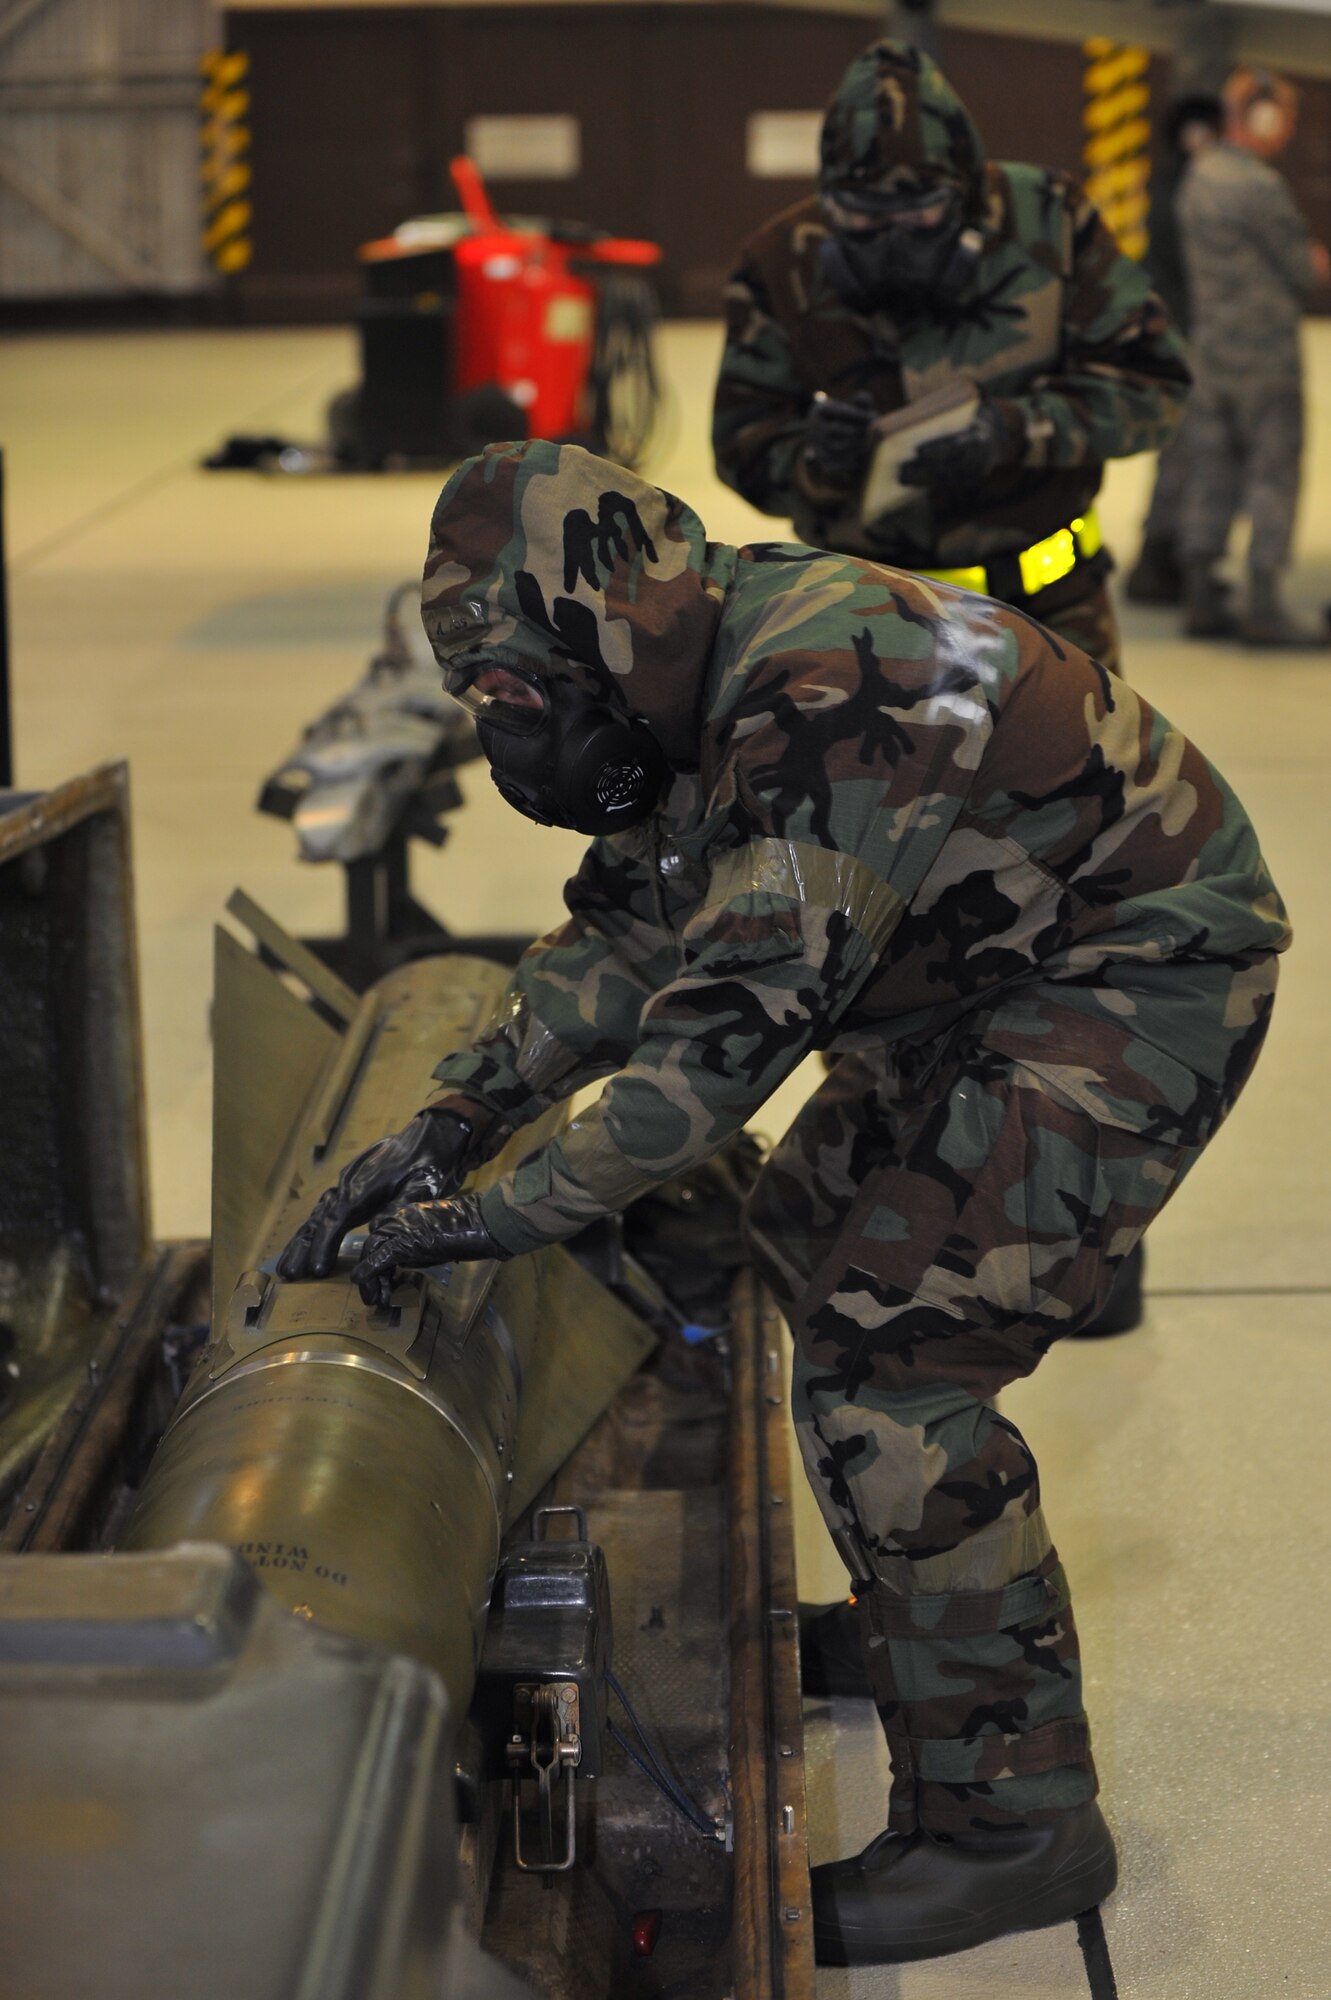 SPANGDAHLEM AIR BASE, Germany –Senior Airman Stephen McCarty, 52nd Aircraft Maintenance Squadron load-crew member, inspects an AGM-65 missile before loading it on an A-10 Thunderbolt II during a munitions-loading evaluation here Nov. 29. The evaluation ensures load-crew members and team chiefs retain their qualification to load all munitions and are ready for mission taskings. Crew members complete an evaluation every month and are required to be evaluated annually while wearing chemical-warfare gear. (U.S. Air Force photo/Airman 1st Class Dillon Davis)